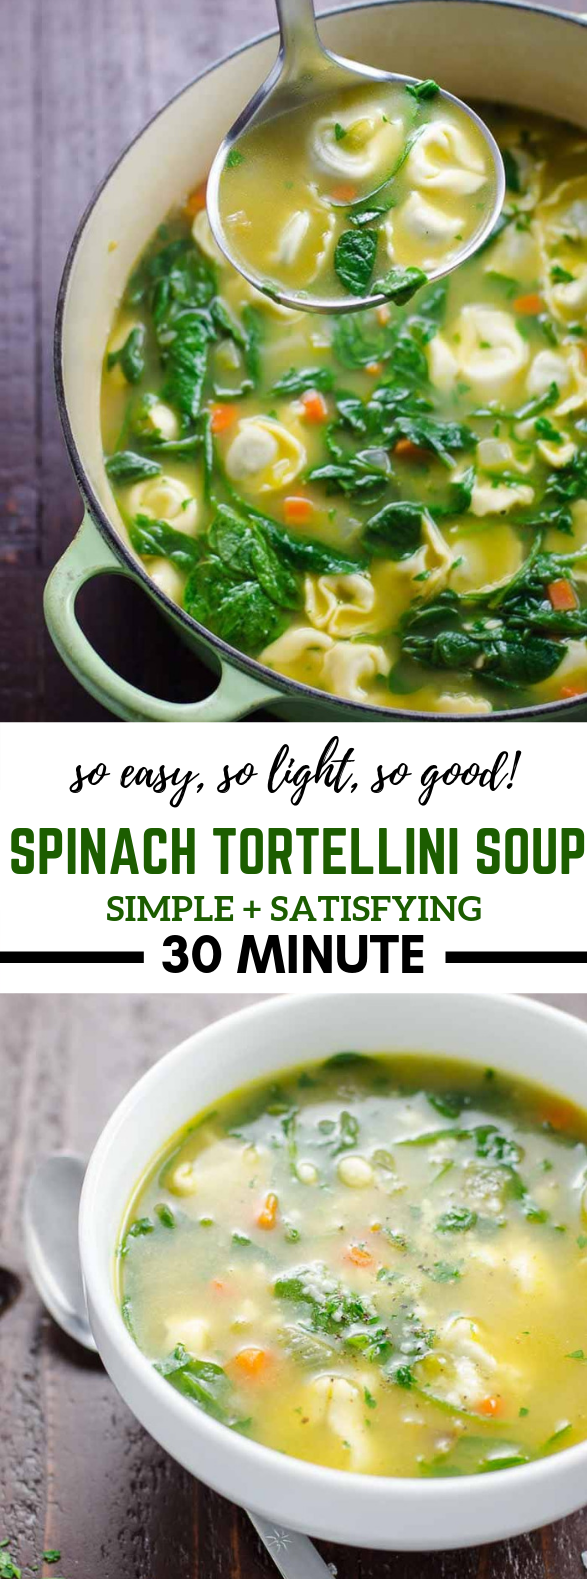 Spinach Tortellini Soup: An Easy Tortellini Soup Recipe